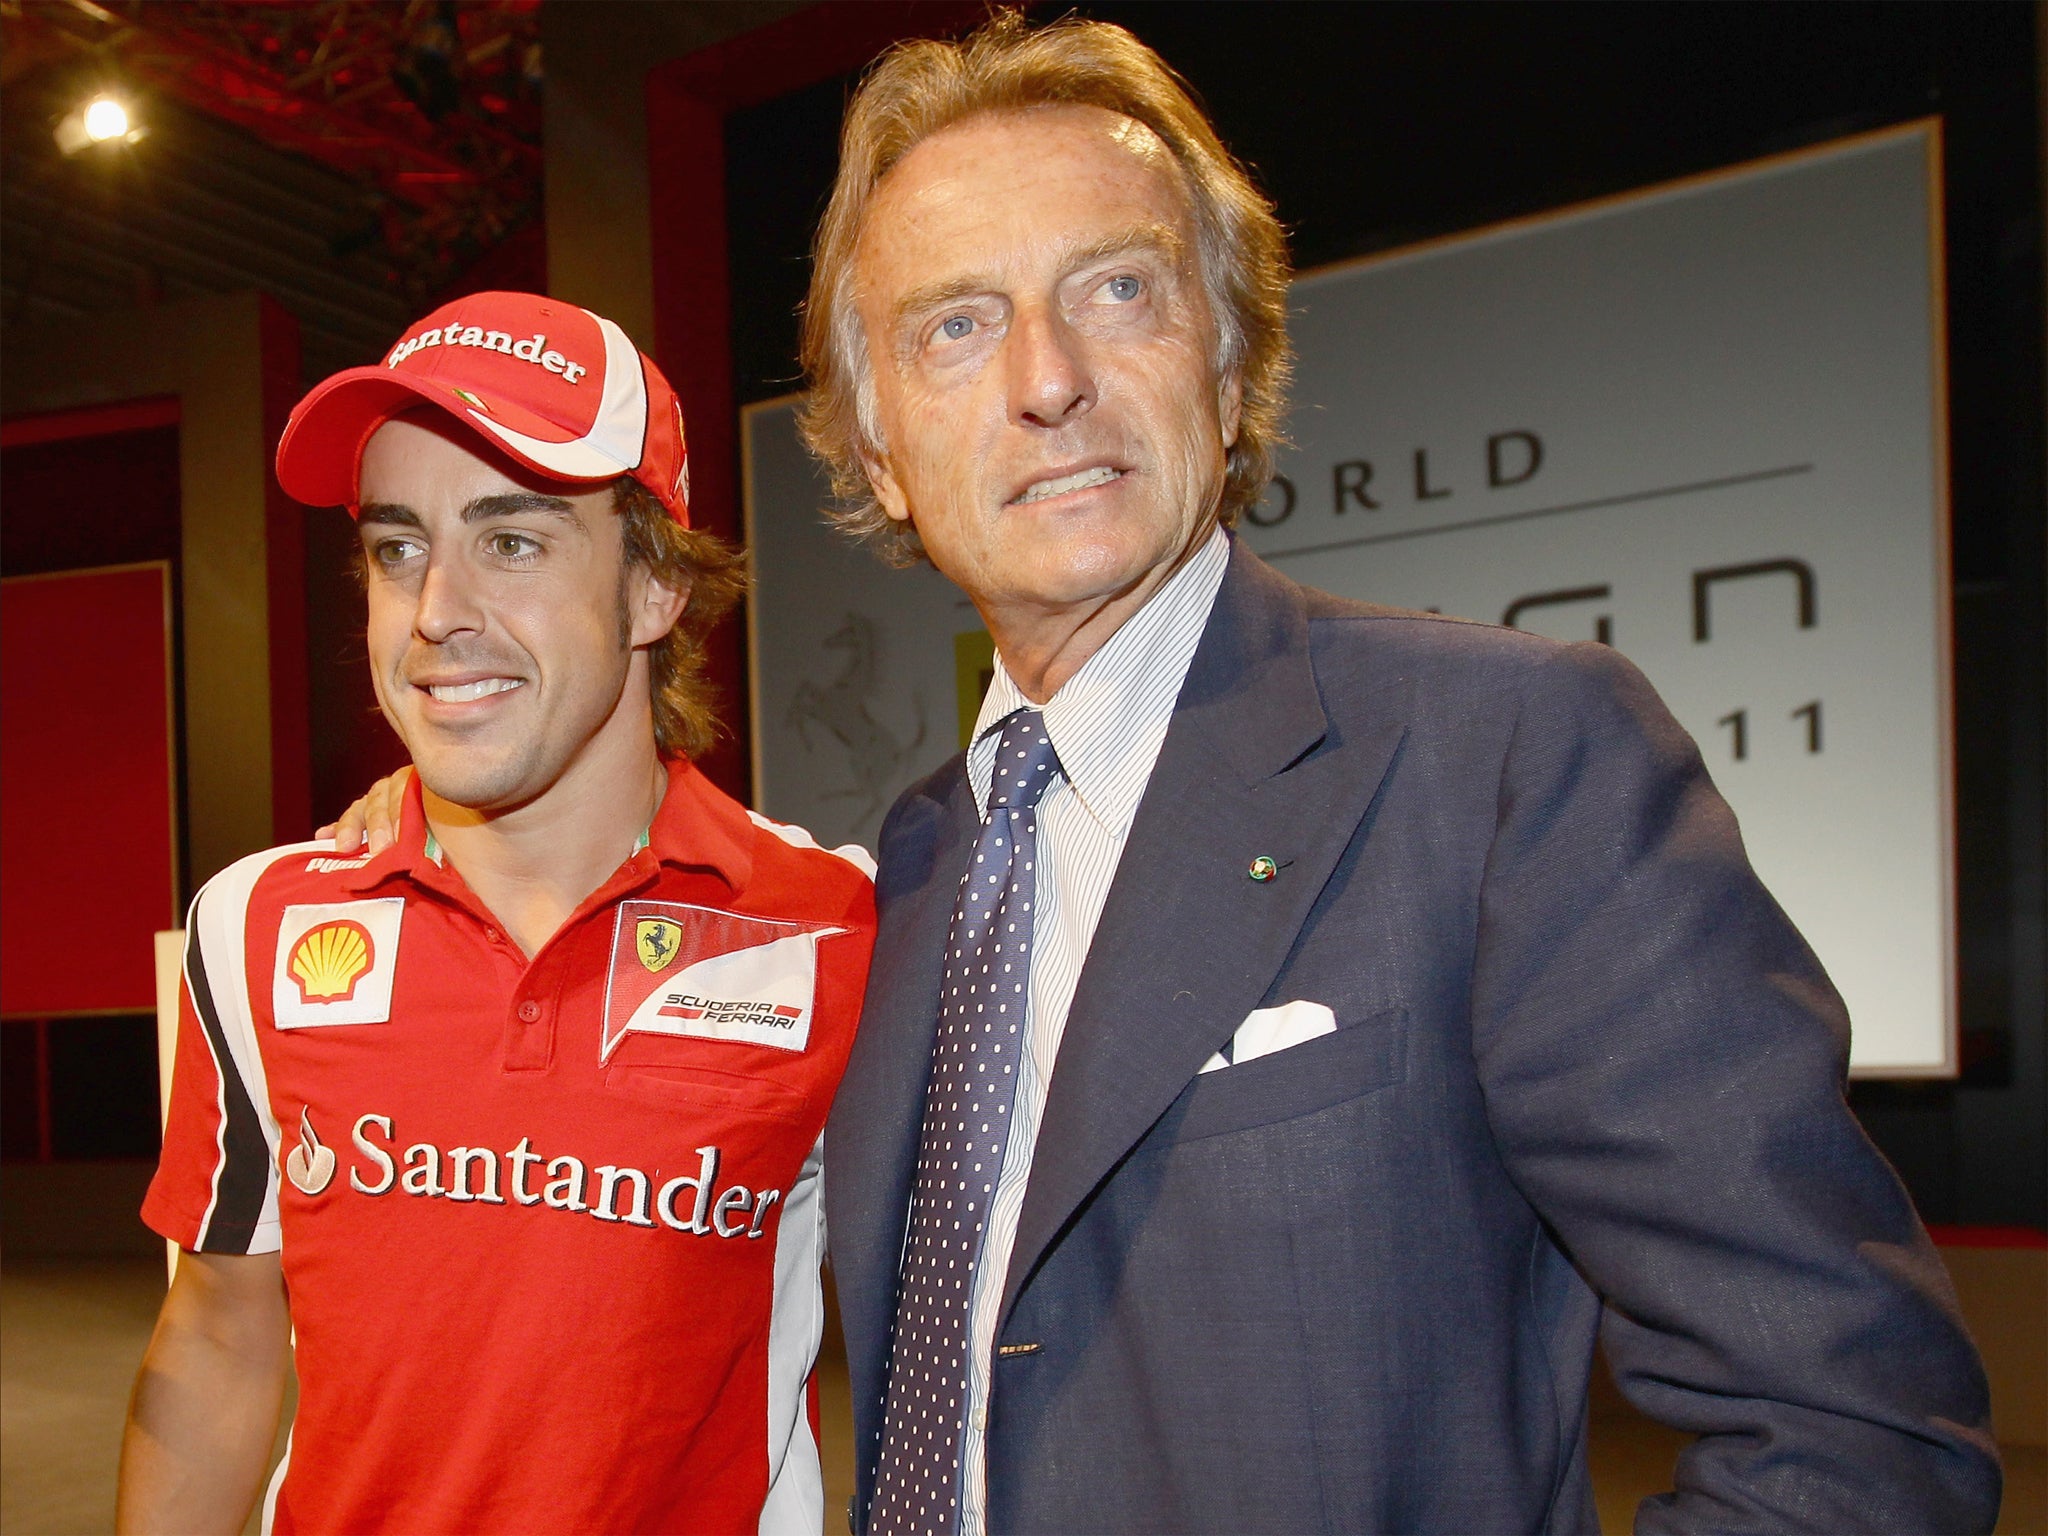 Fernando Alonso has yet to win a world title for Ferrari, much to the disappointment of president Luca di Montezemolo